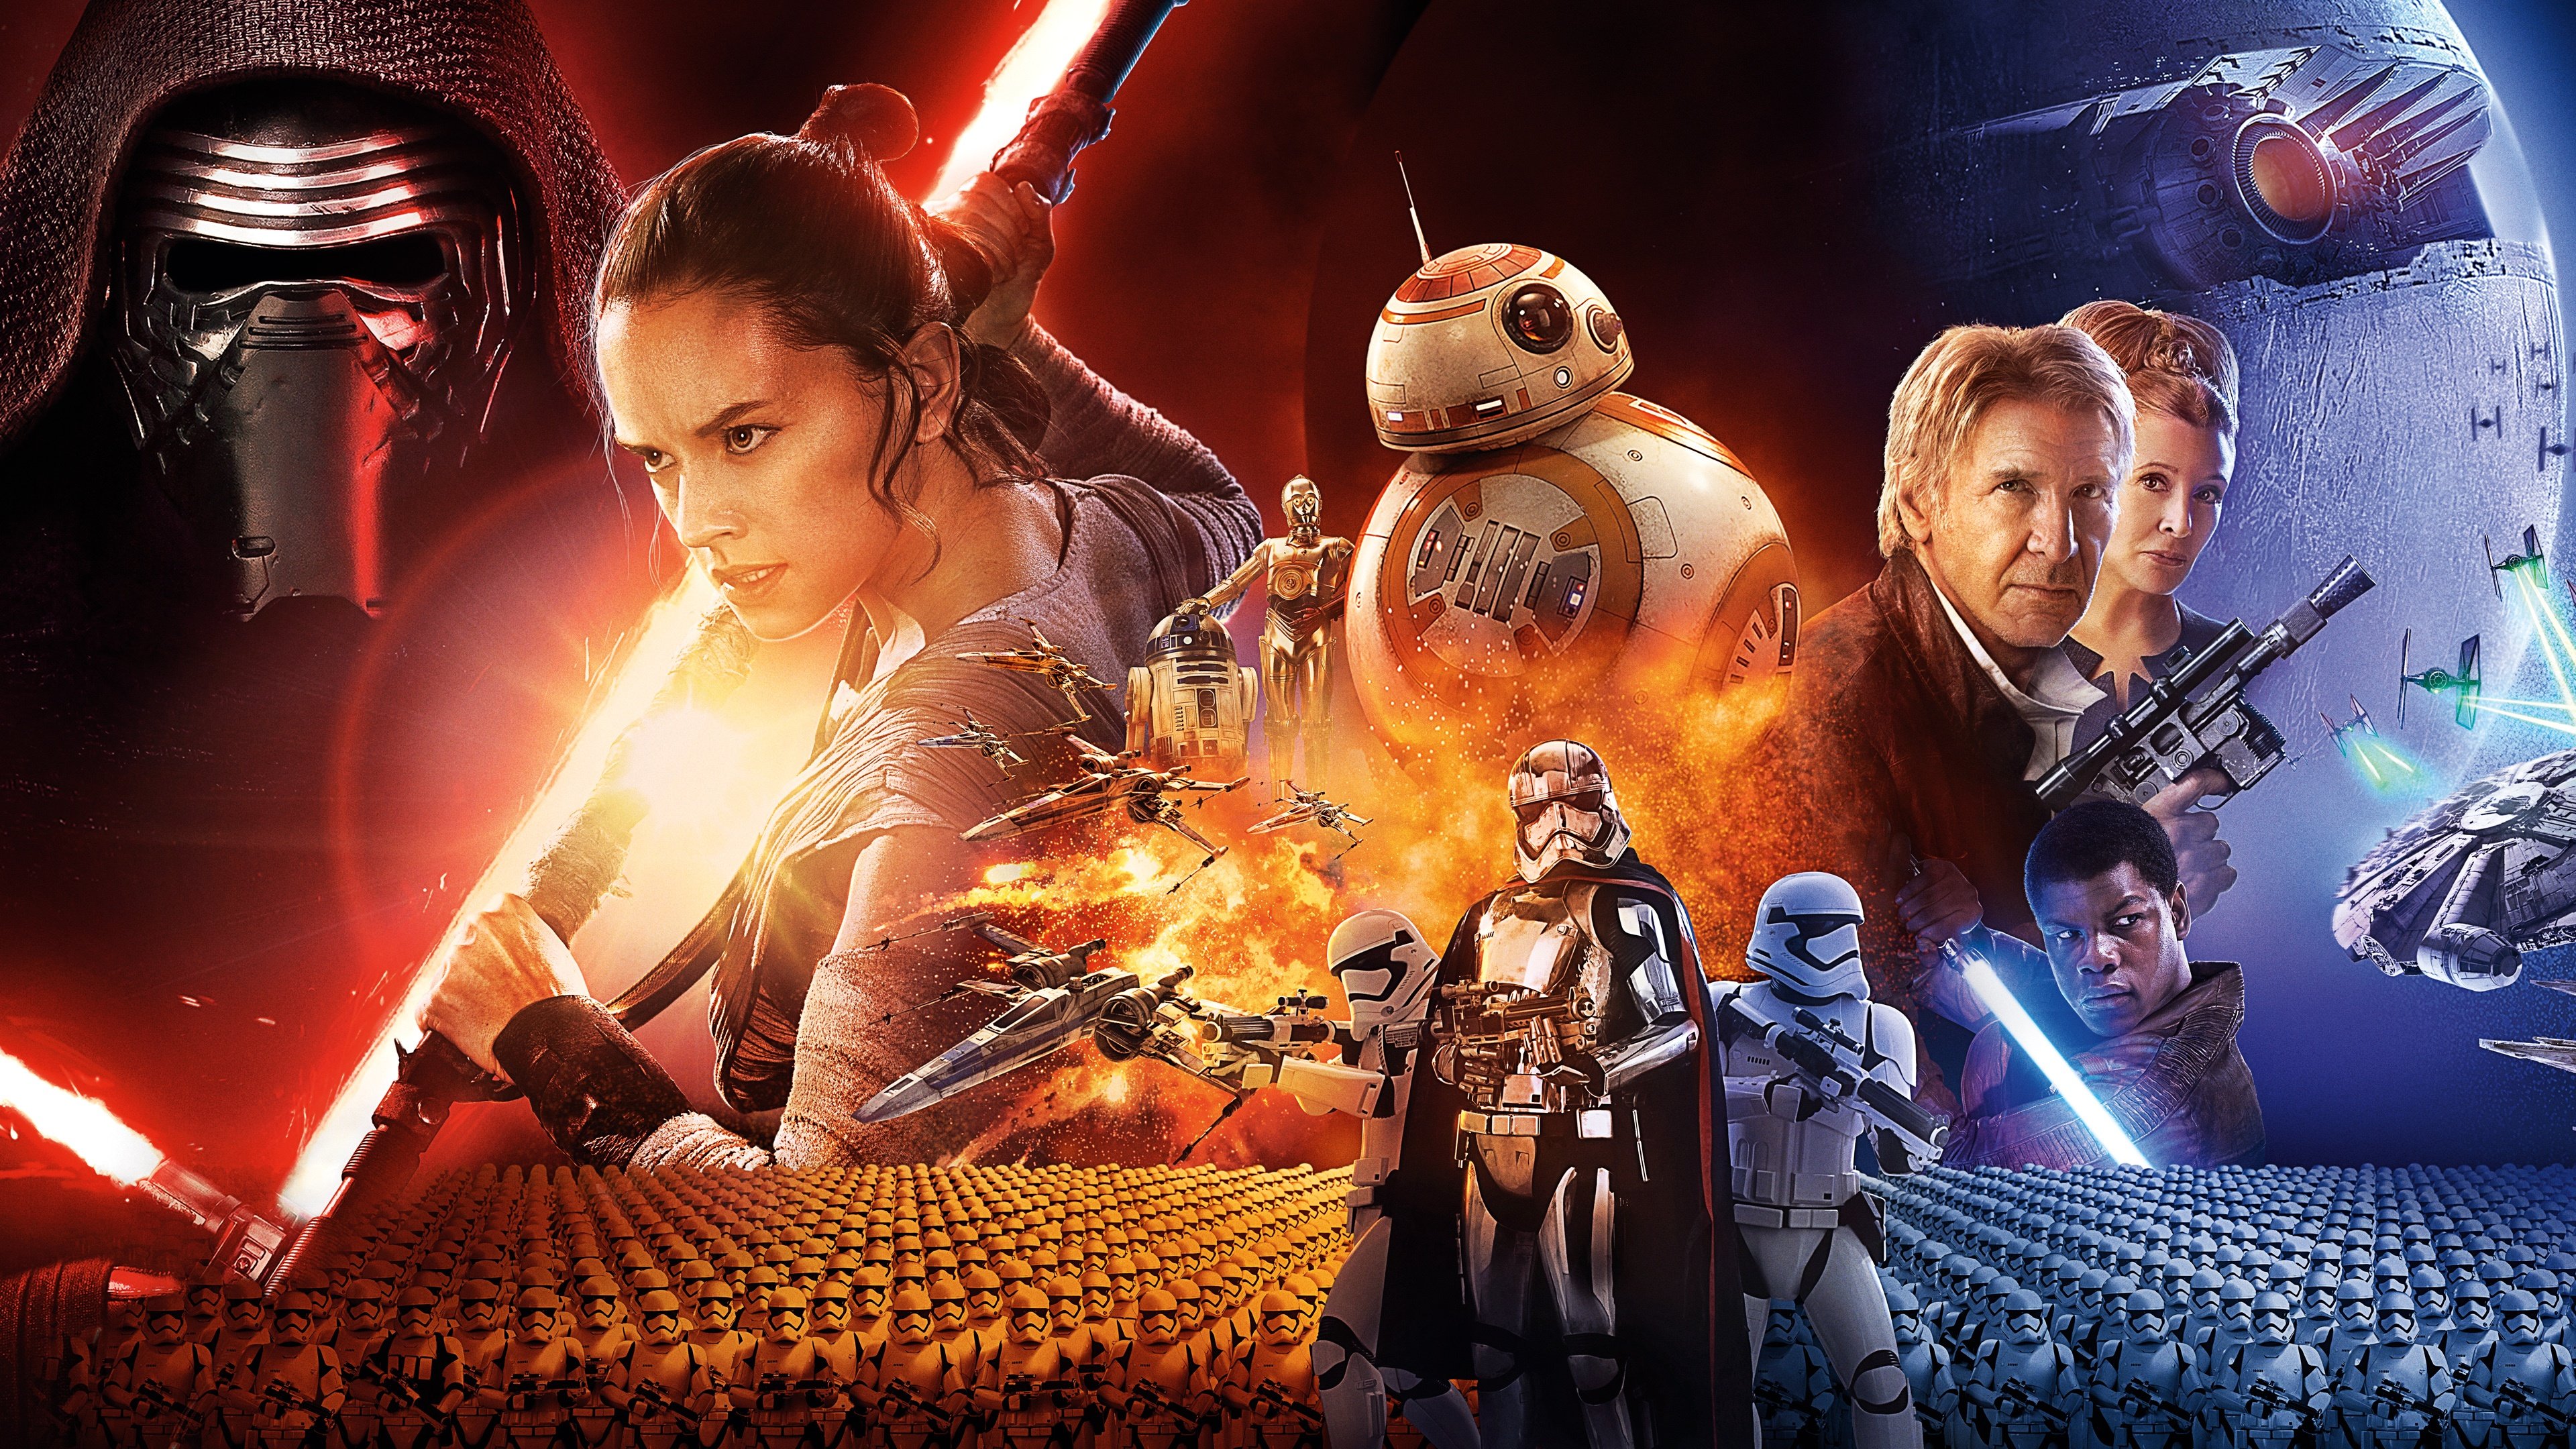 RELATED For Star Wars The Force Awakens Poster Widescreen 3840x2160